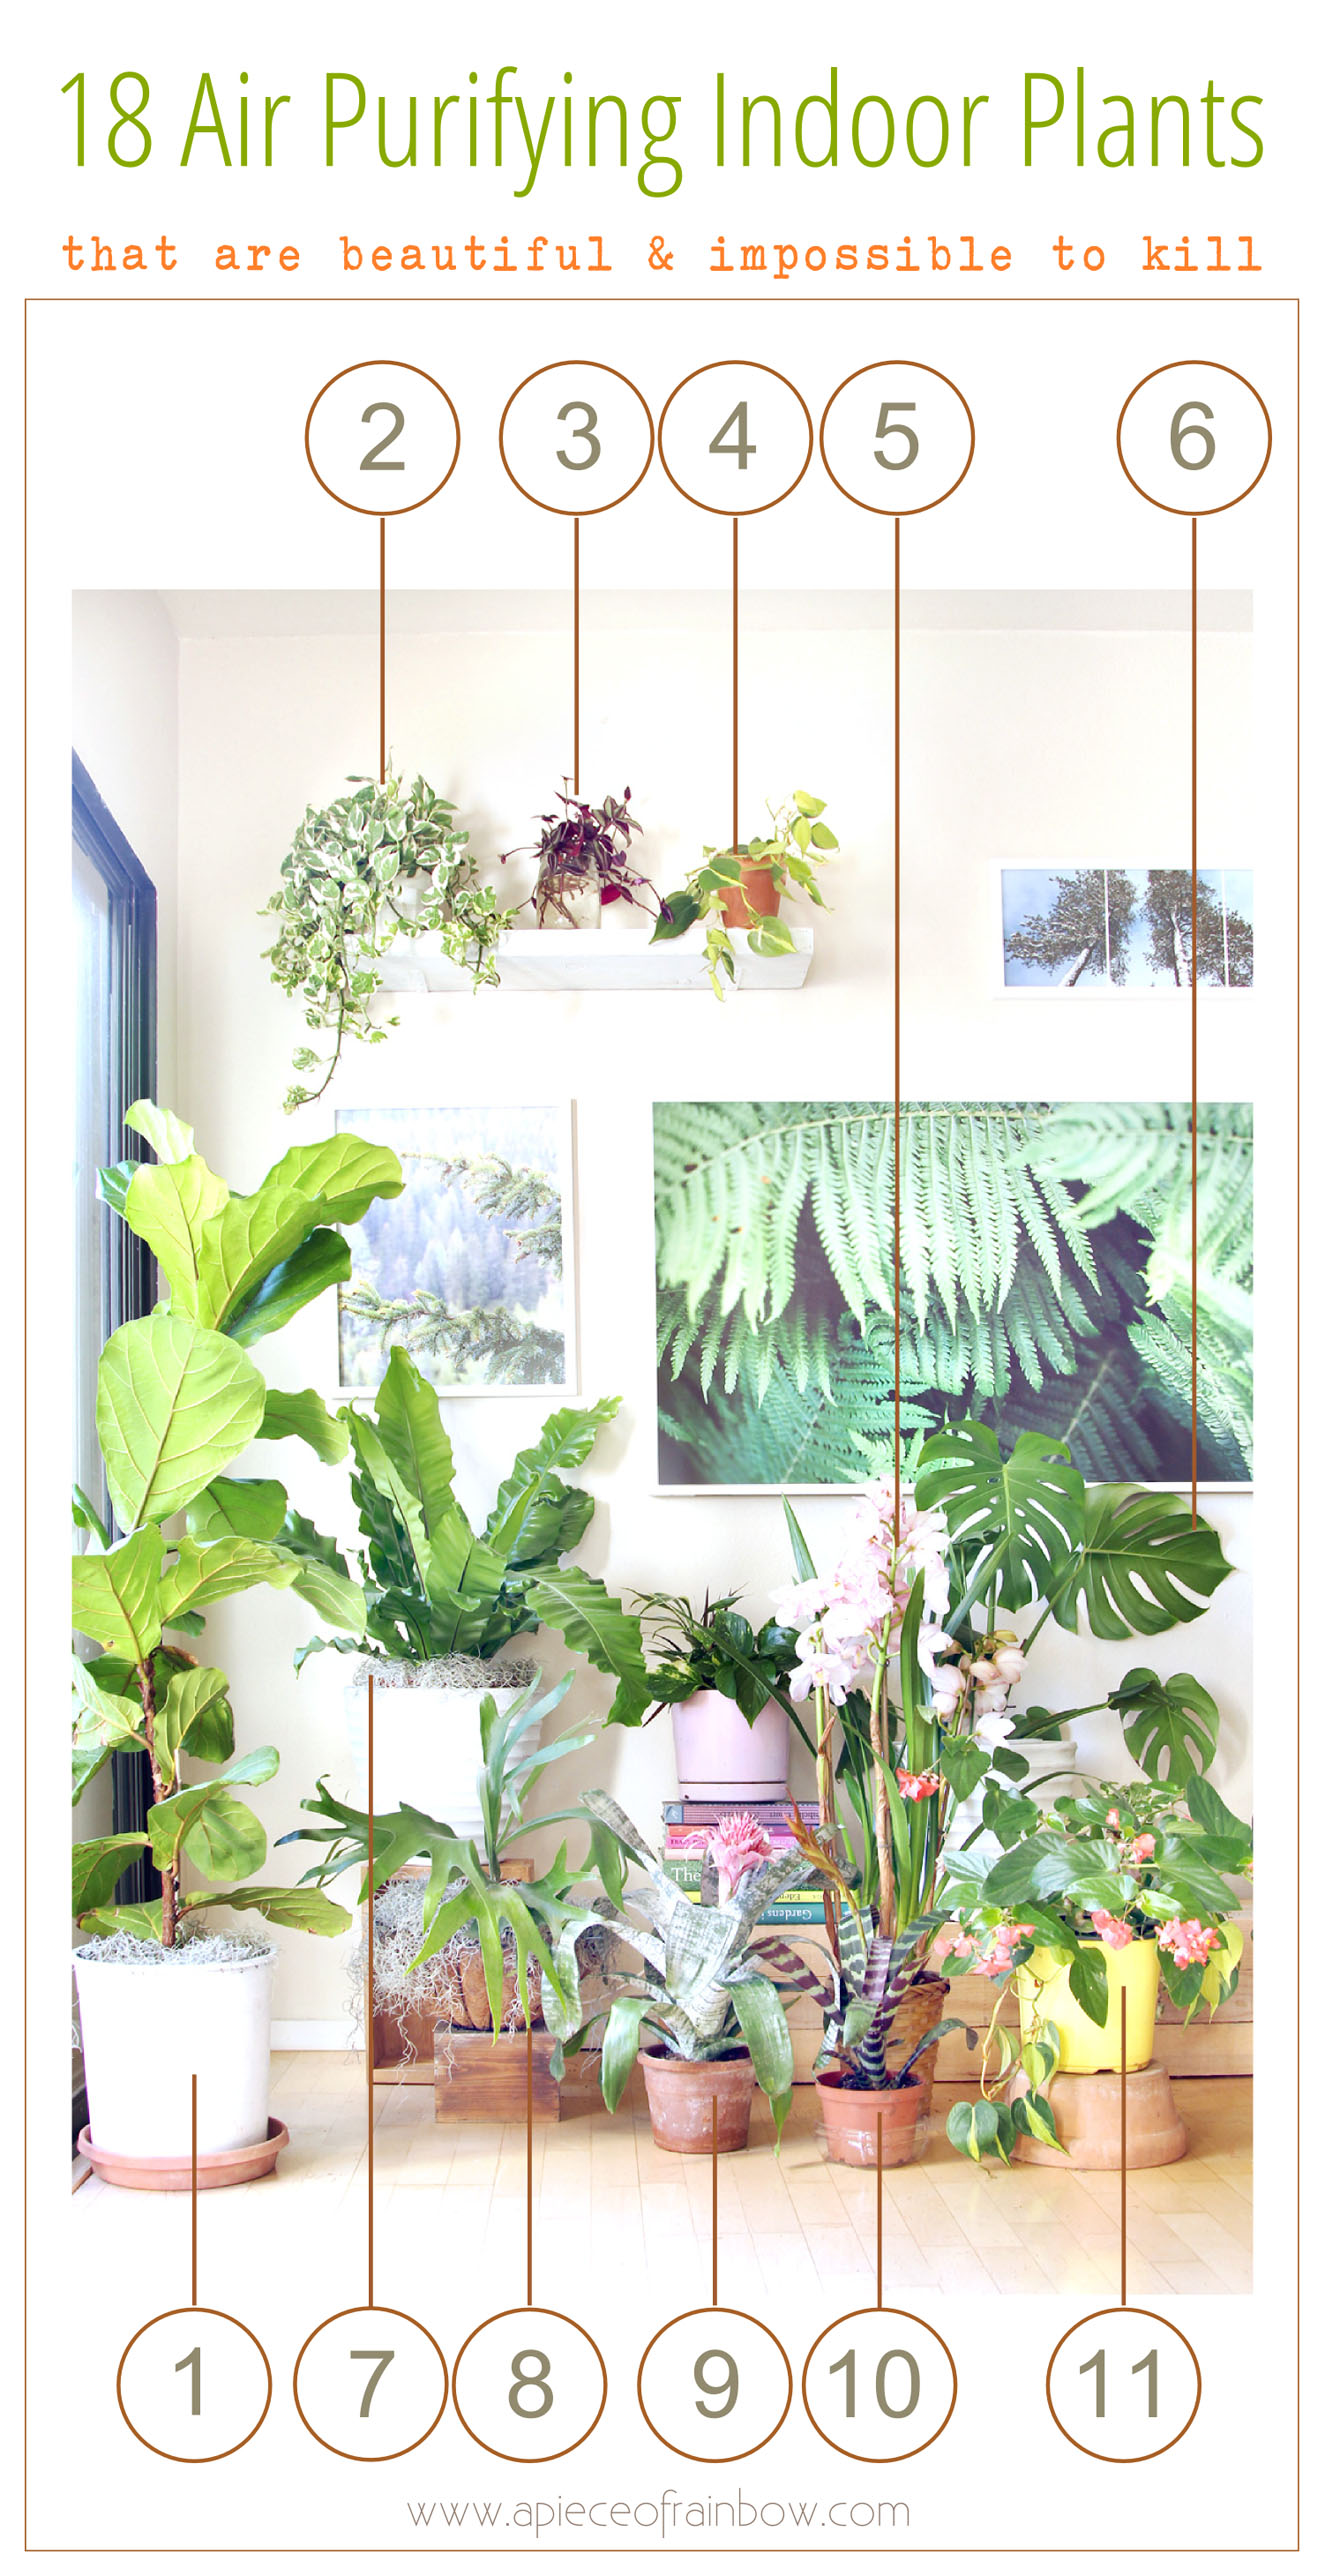 18 most beautiful & easy to grow indoor plants. Best houseplants with showy foliage & flowers, plus gardening tips for low light conditions. 